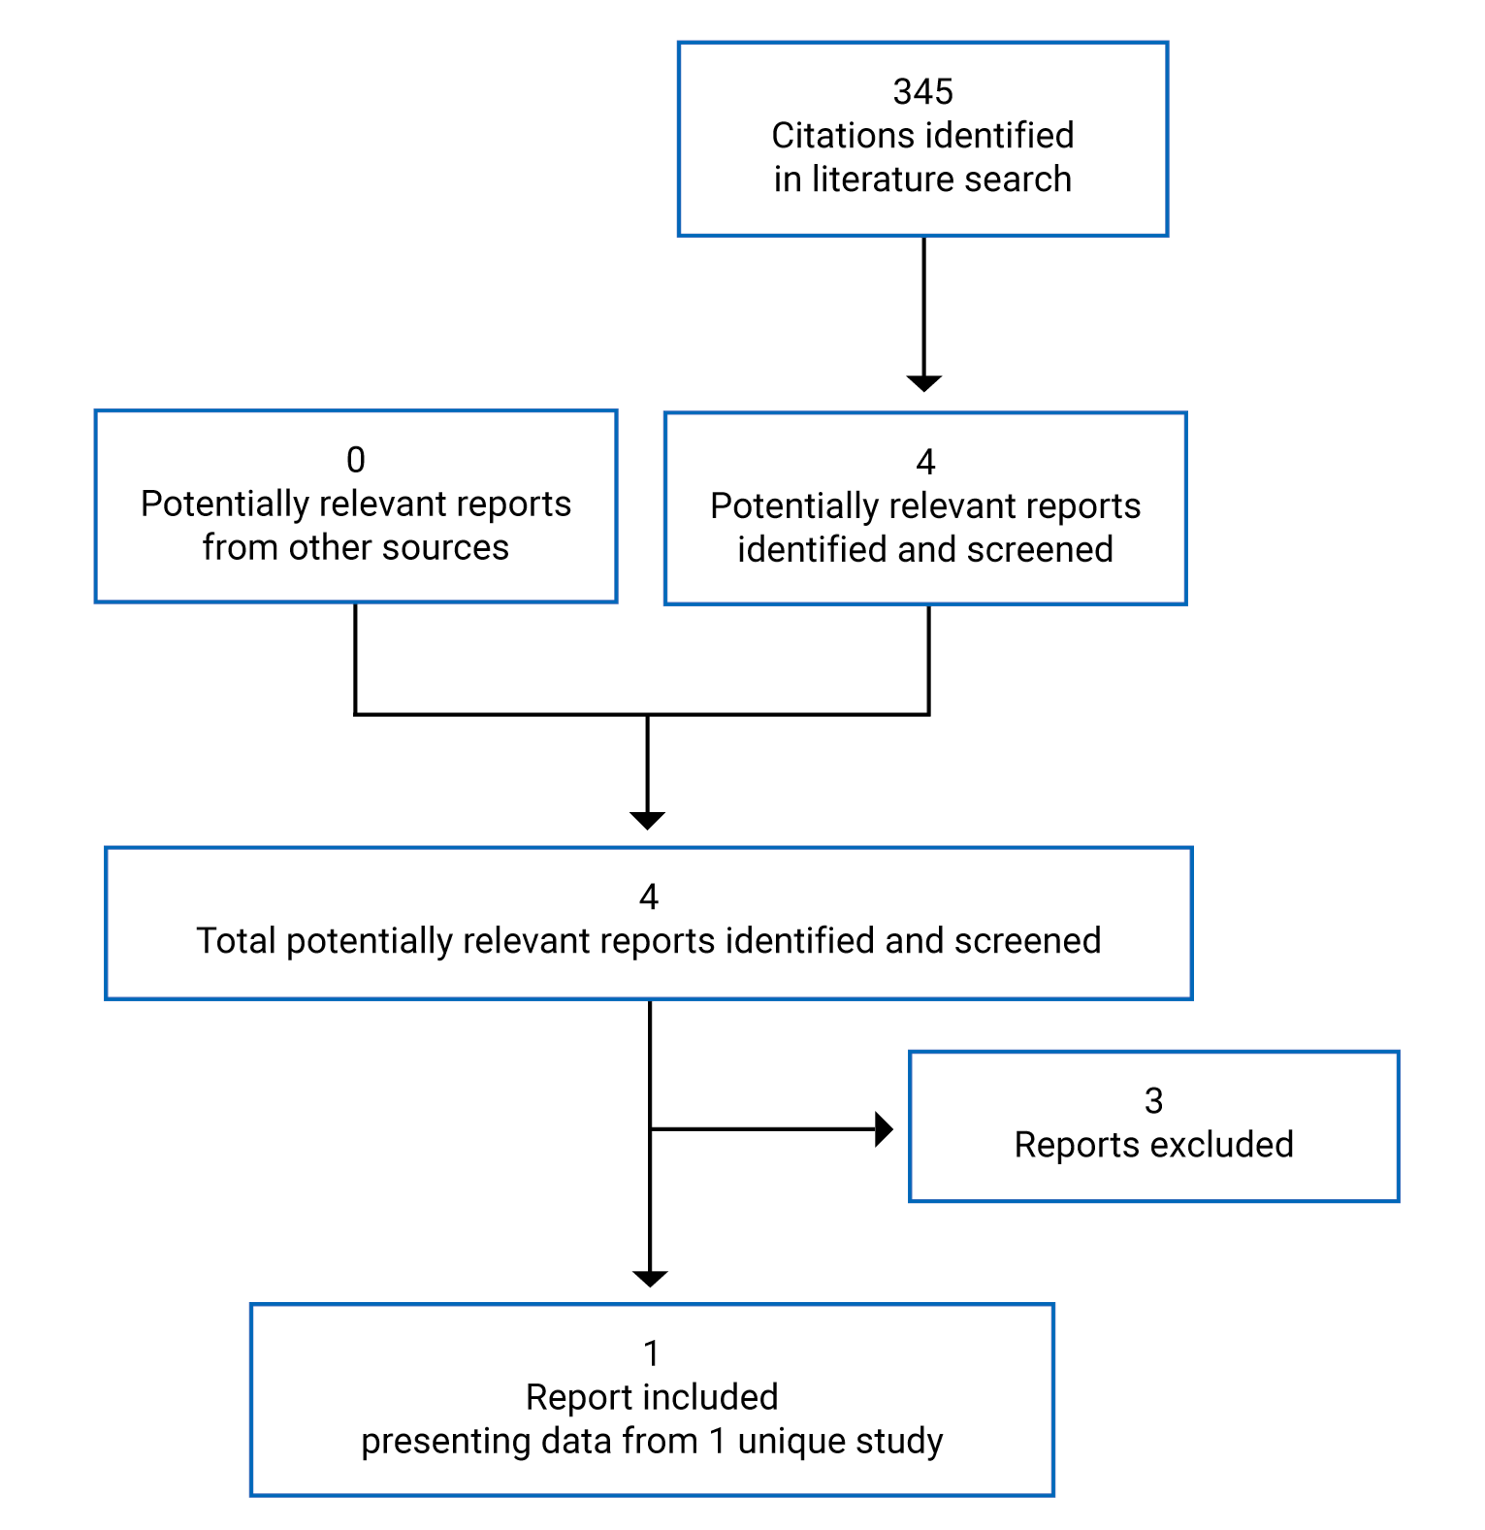 Flow diagram of included studies for the CADTH systematic review. A total of 345 studies were identified of which 4 were screened at full text. One article was included based on 1 unique study.